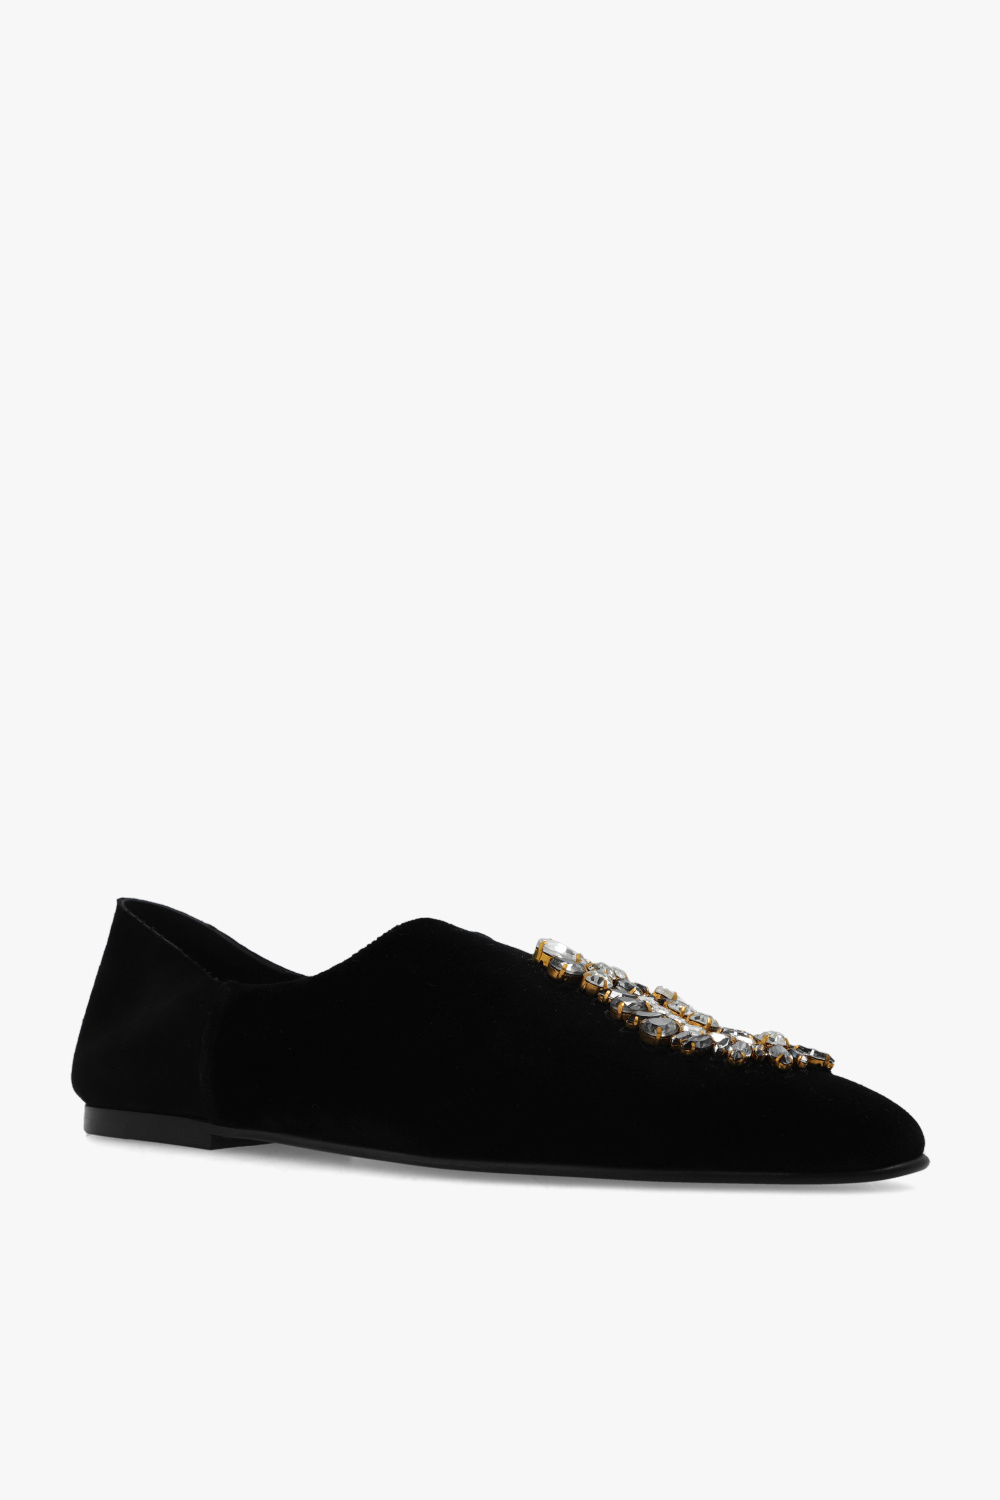 Dolce & Gabbana Slip-on shoes with crystal appliqué